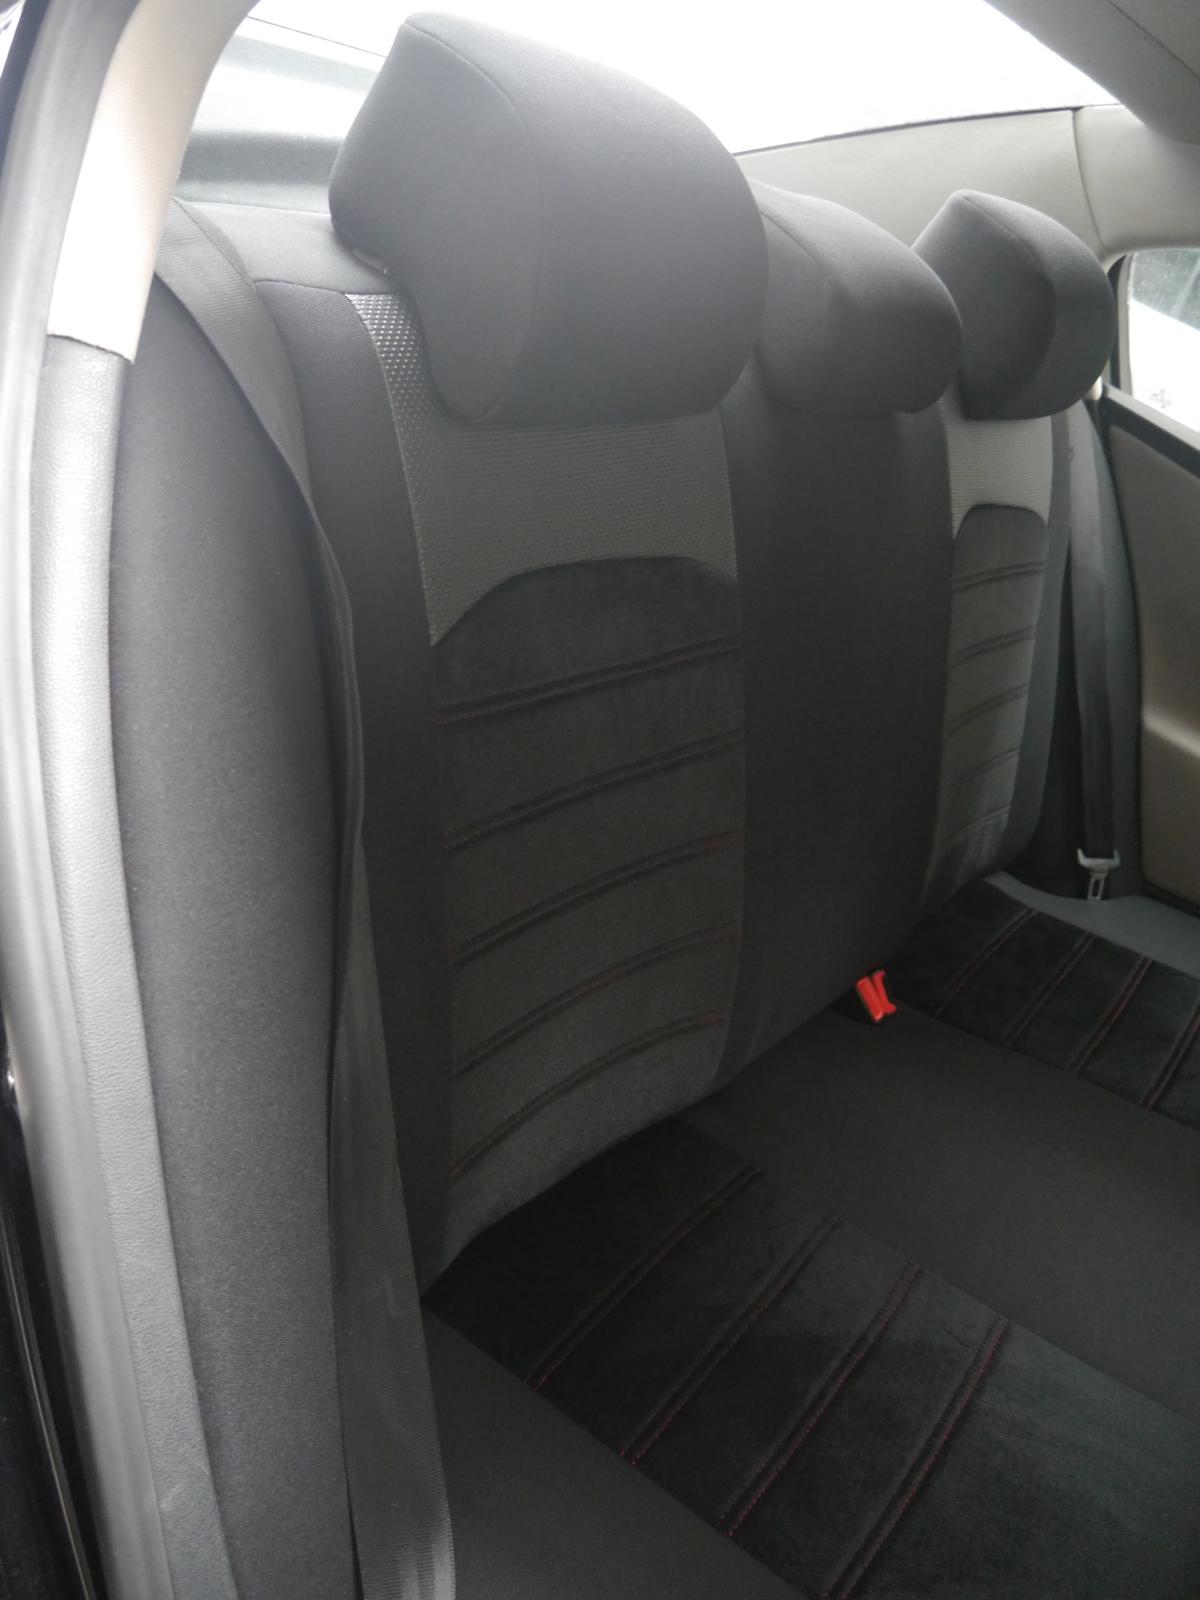 Car seat covers protectors for Volvo XC60 No4